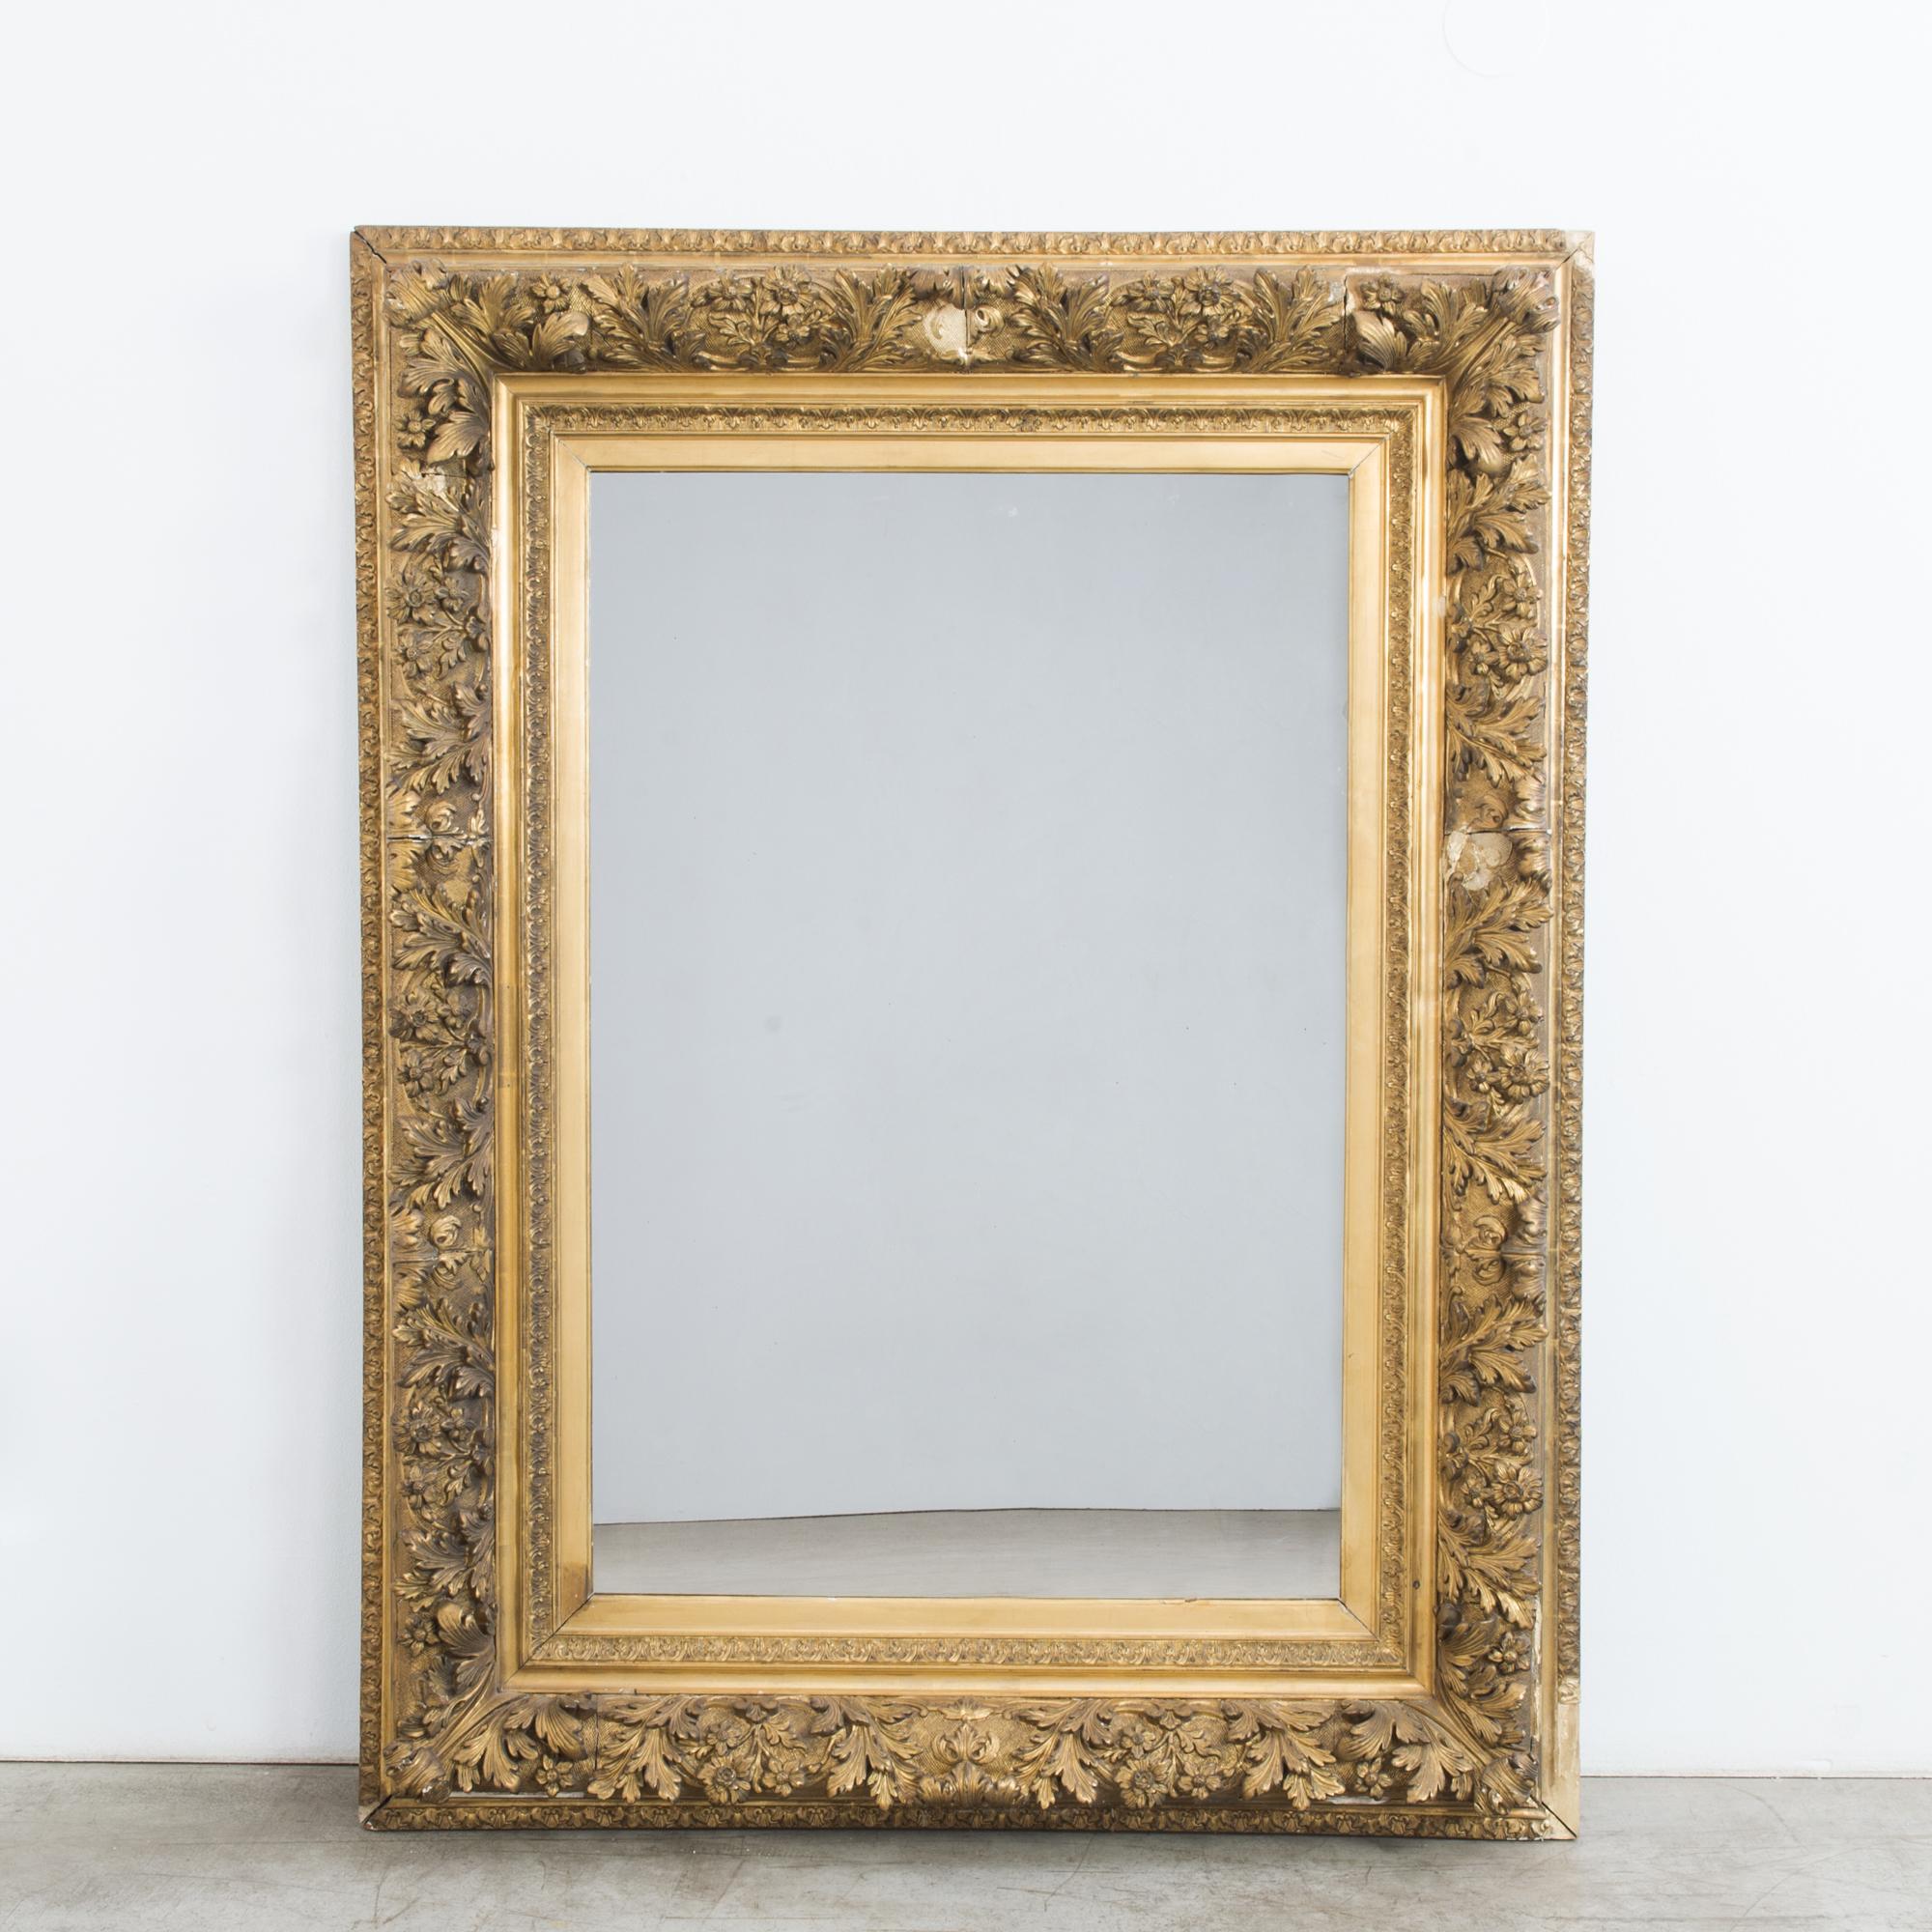 A gilded mirror from France, circa 1880. Luxuriant rococo carving dances across the wide borders of the frame, full of vitality and detail. Unfurling leaves and dainty flowers give an impression of natural variation and exuberance, elevated by the